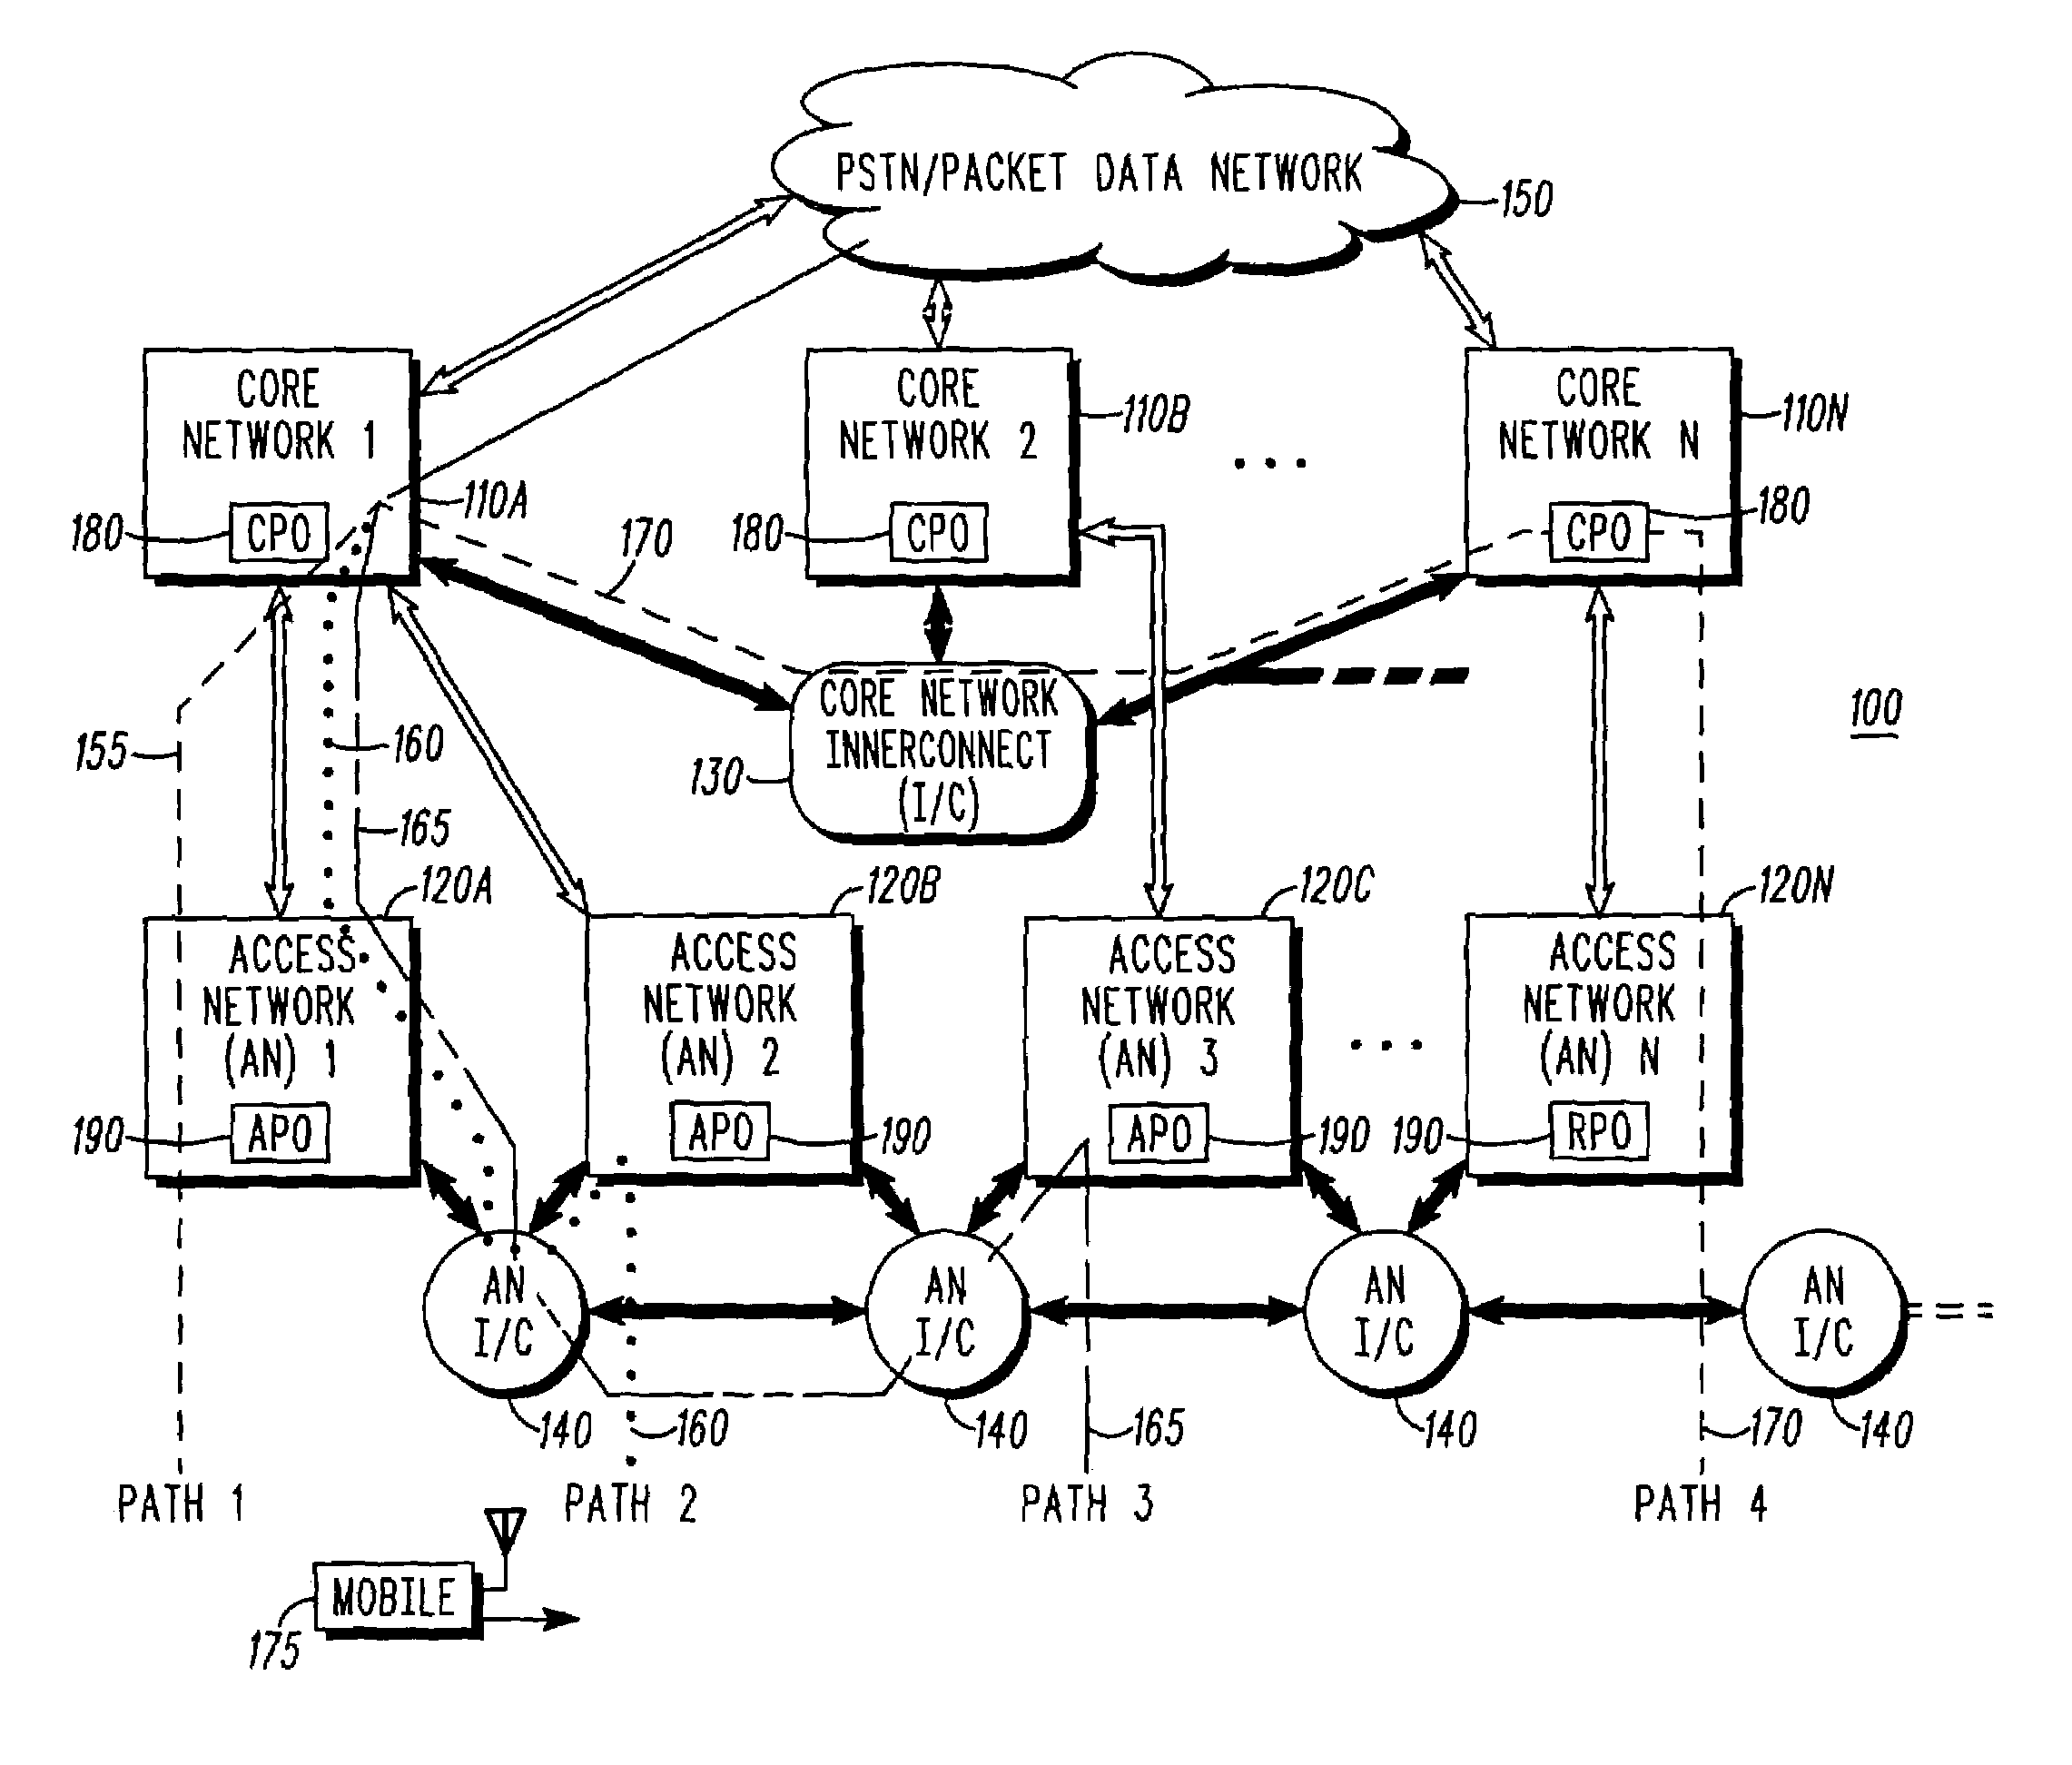 Segmented and distributed path optimization in a communication network